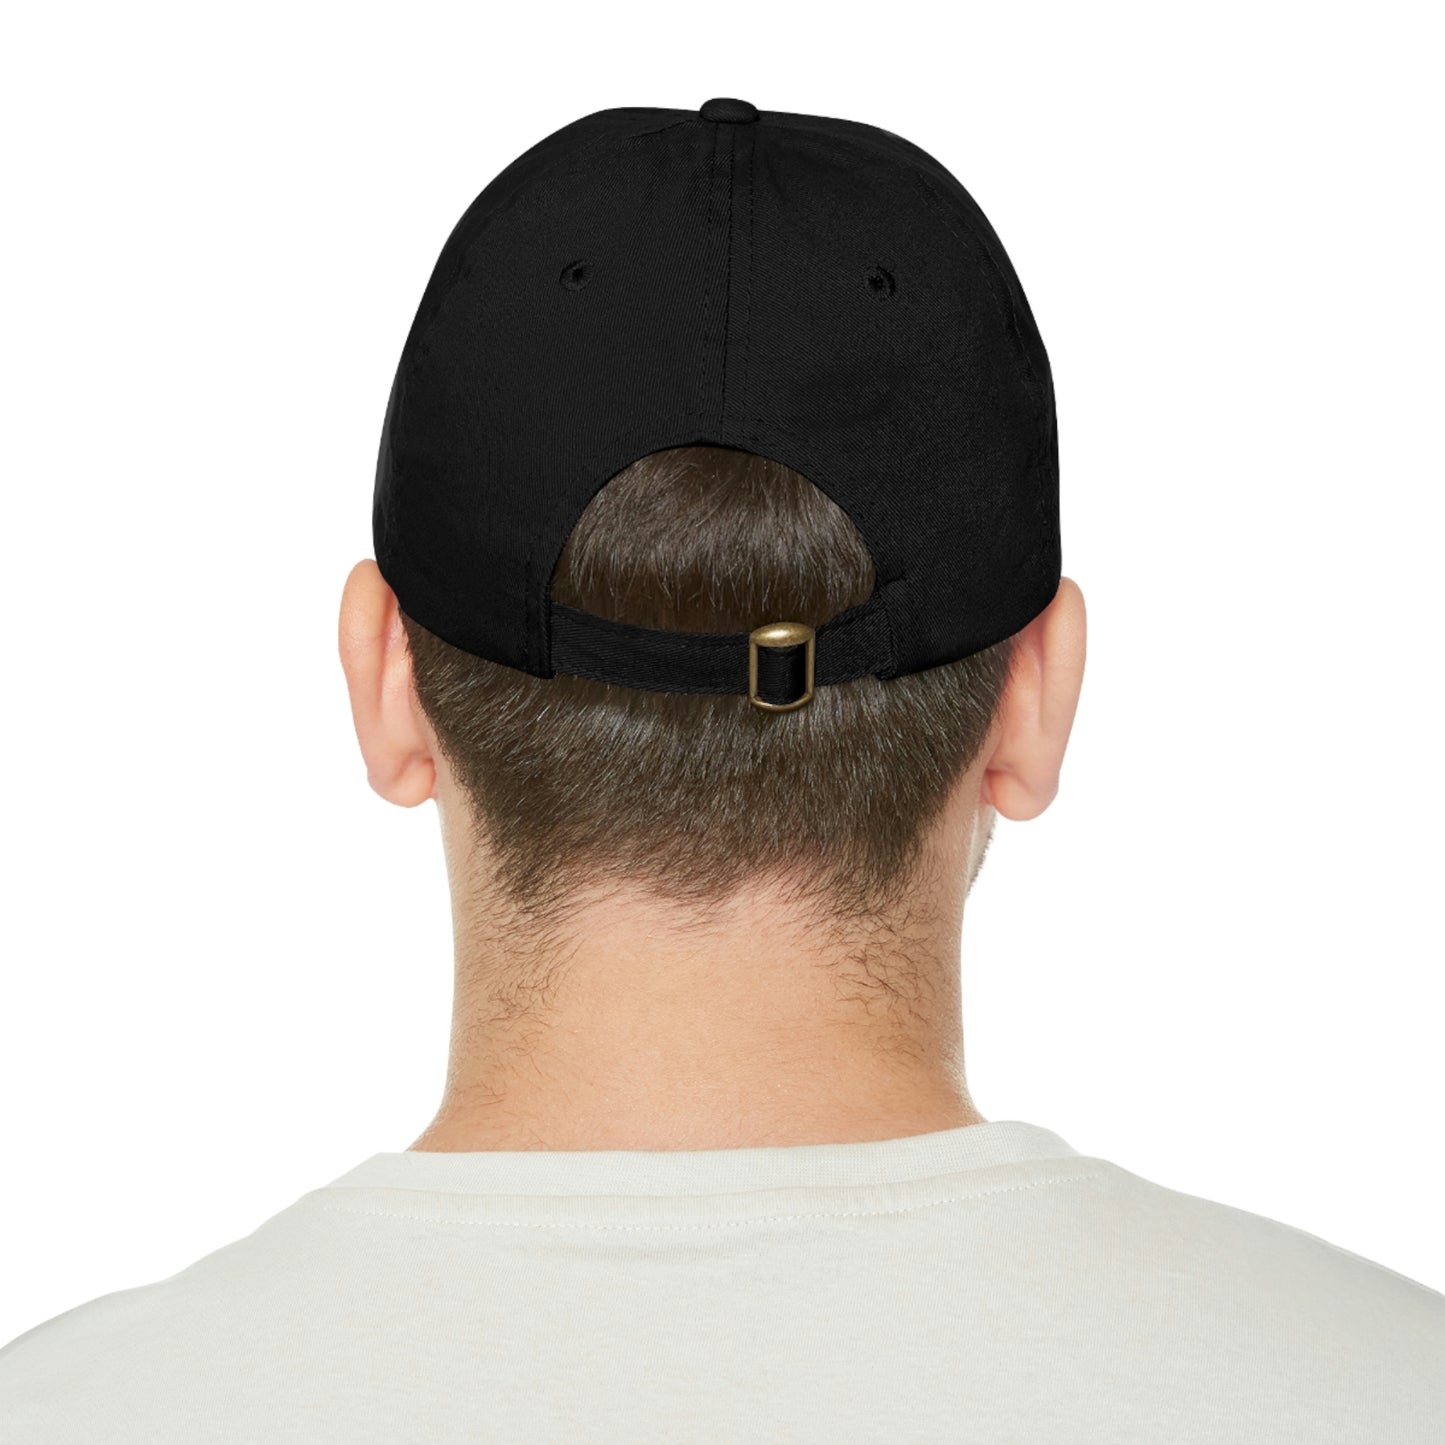 Kings Create Kings Dad Hat with Leather Patch (Rectangle)